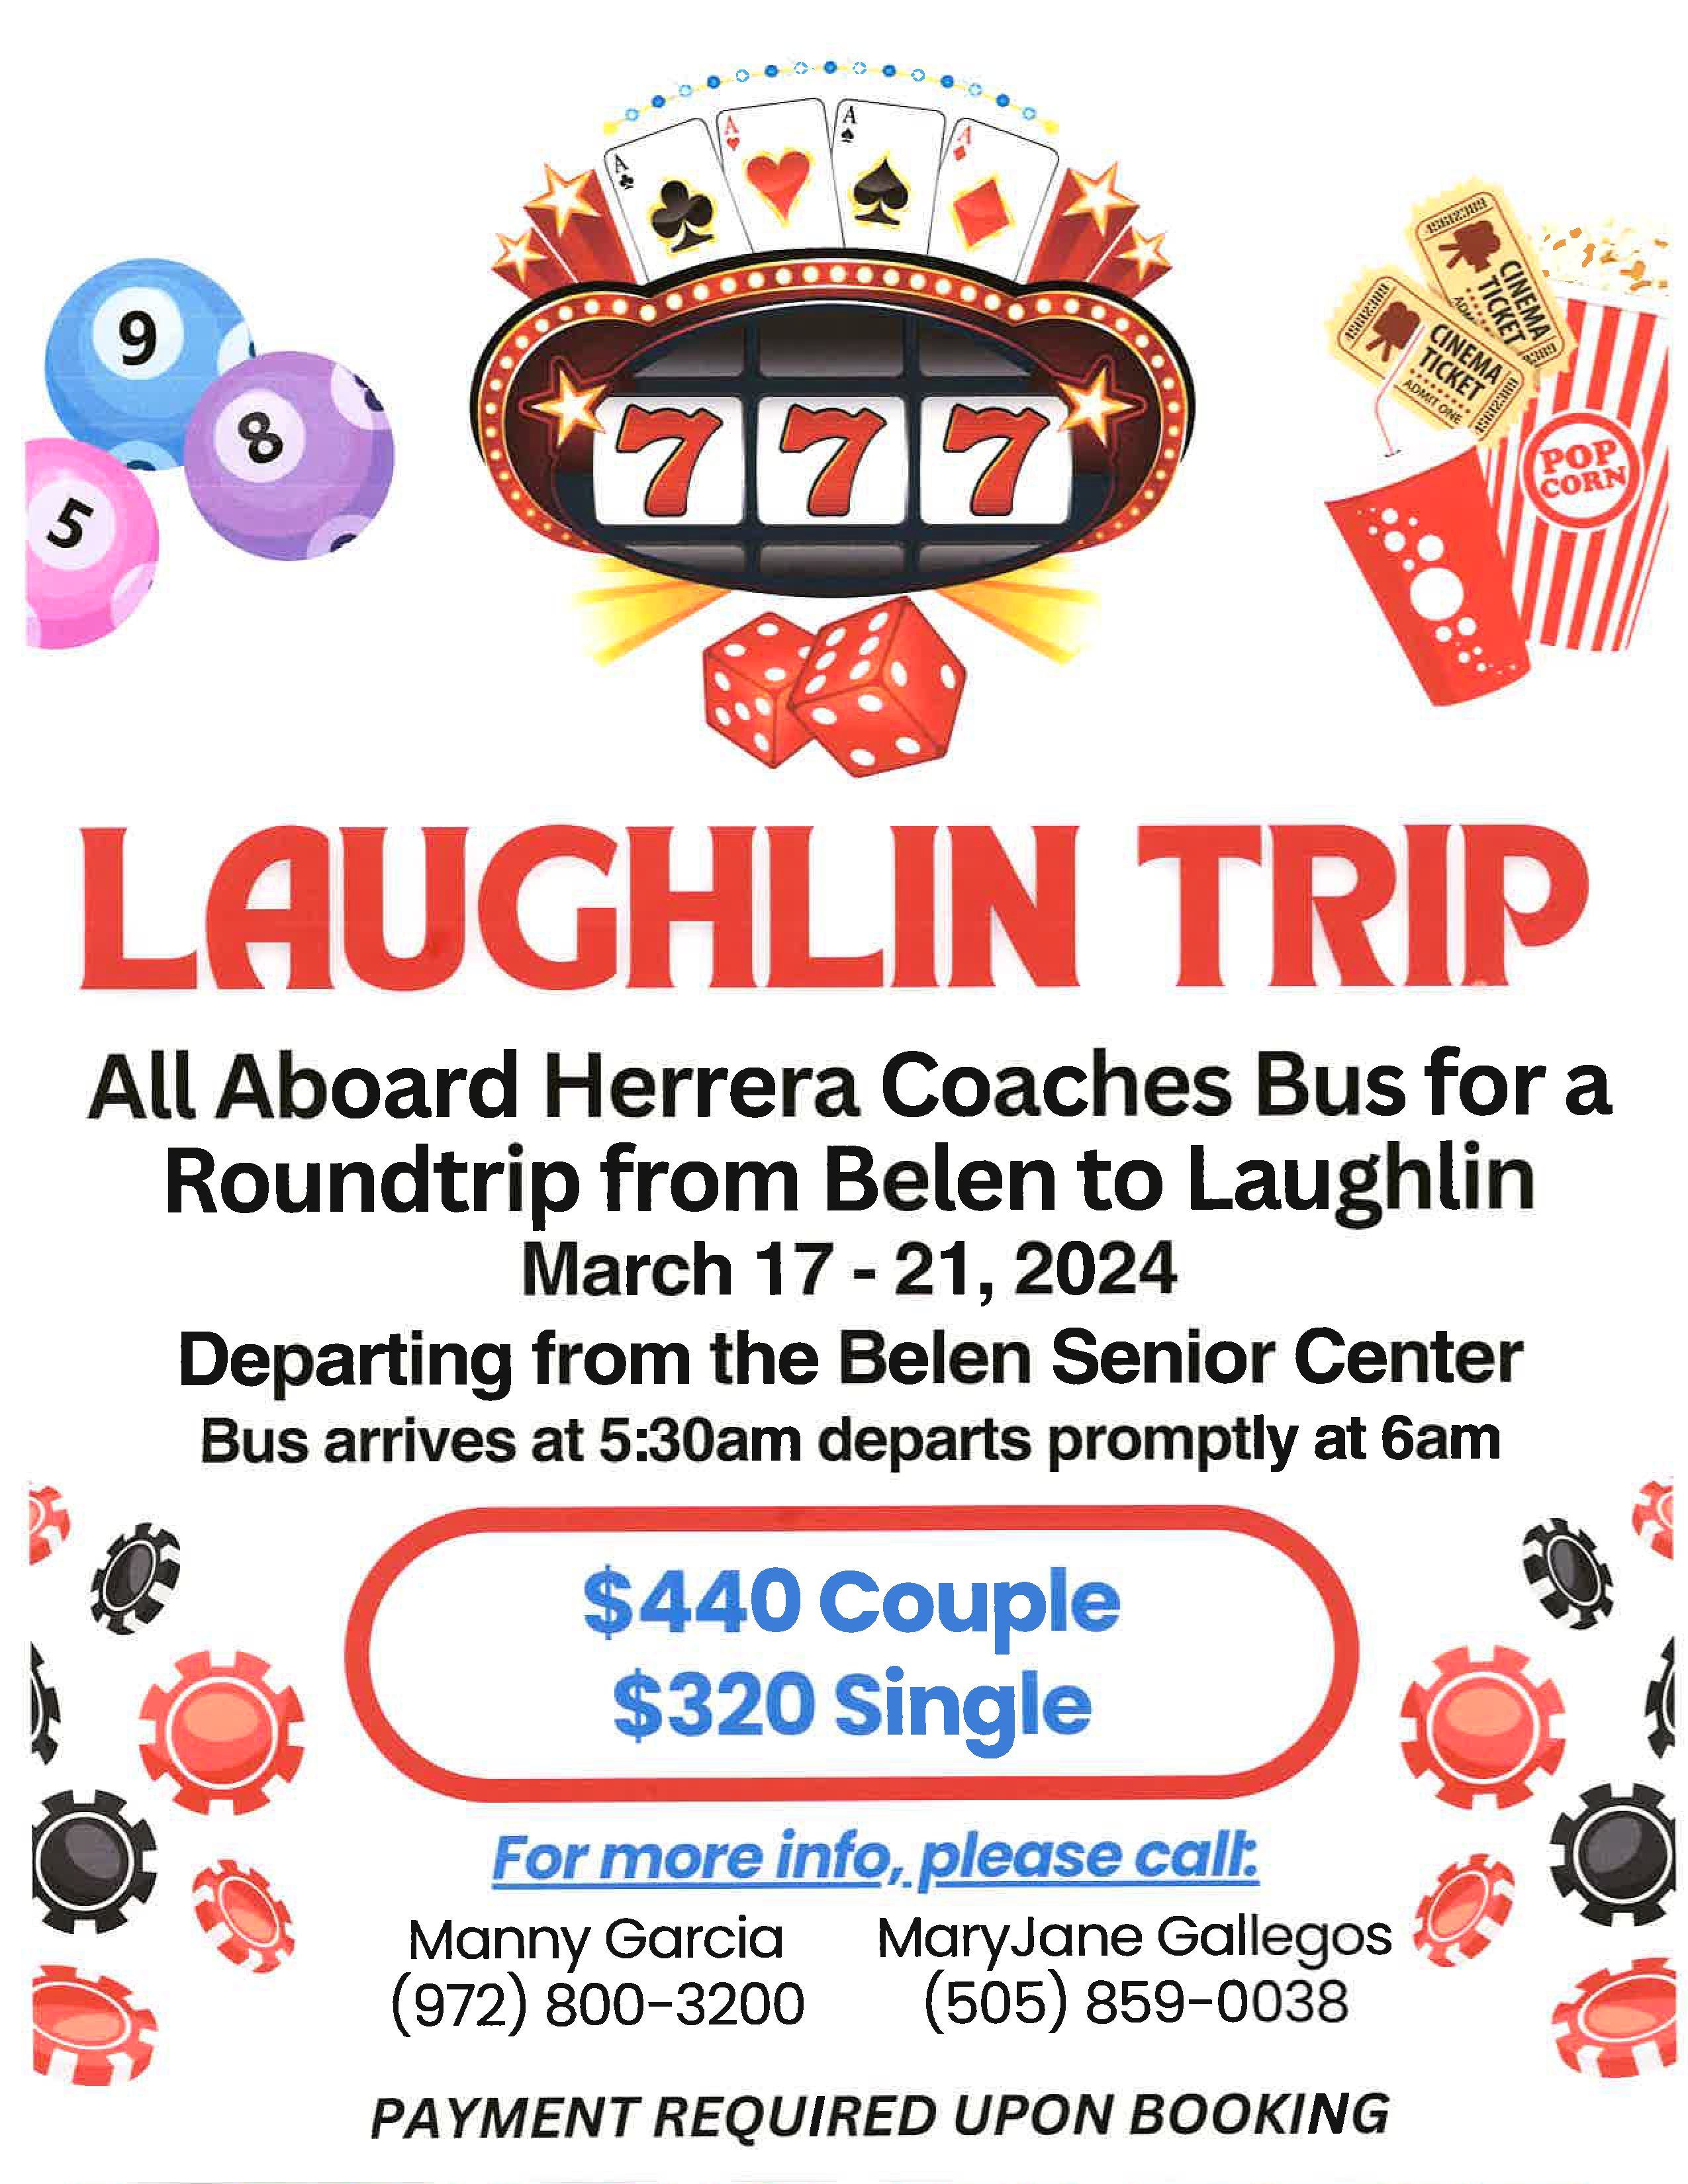 Featured image for “Laughlin Trip”